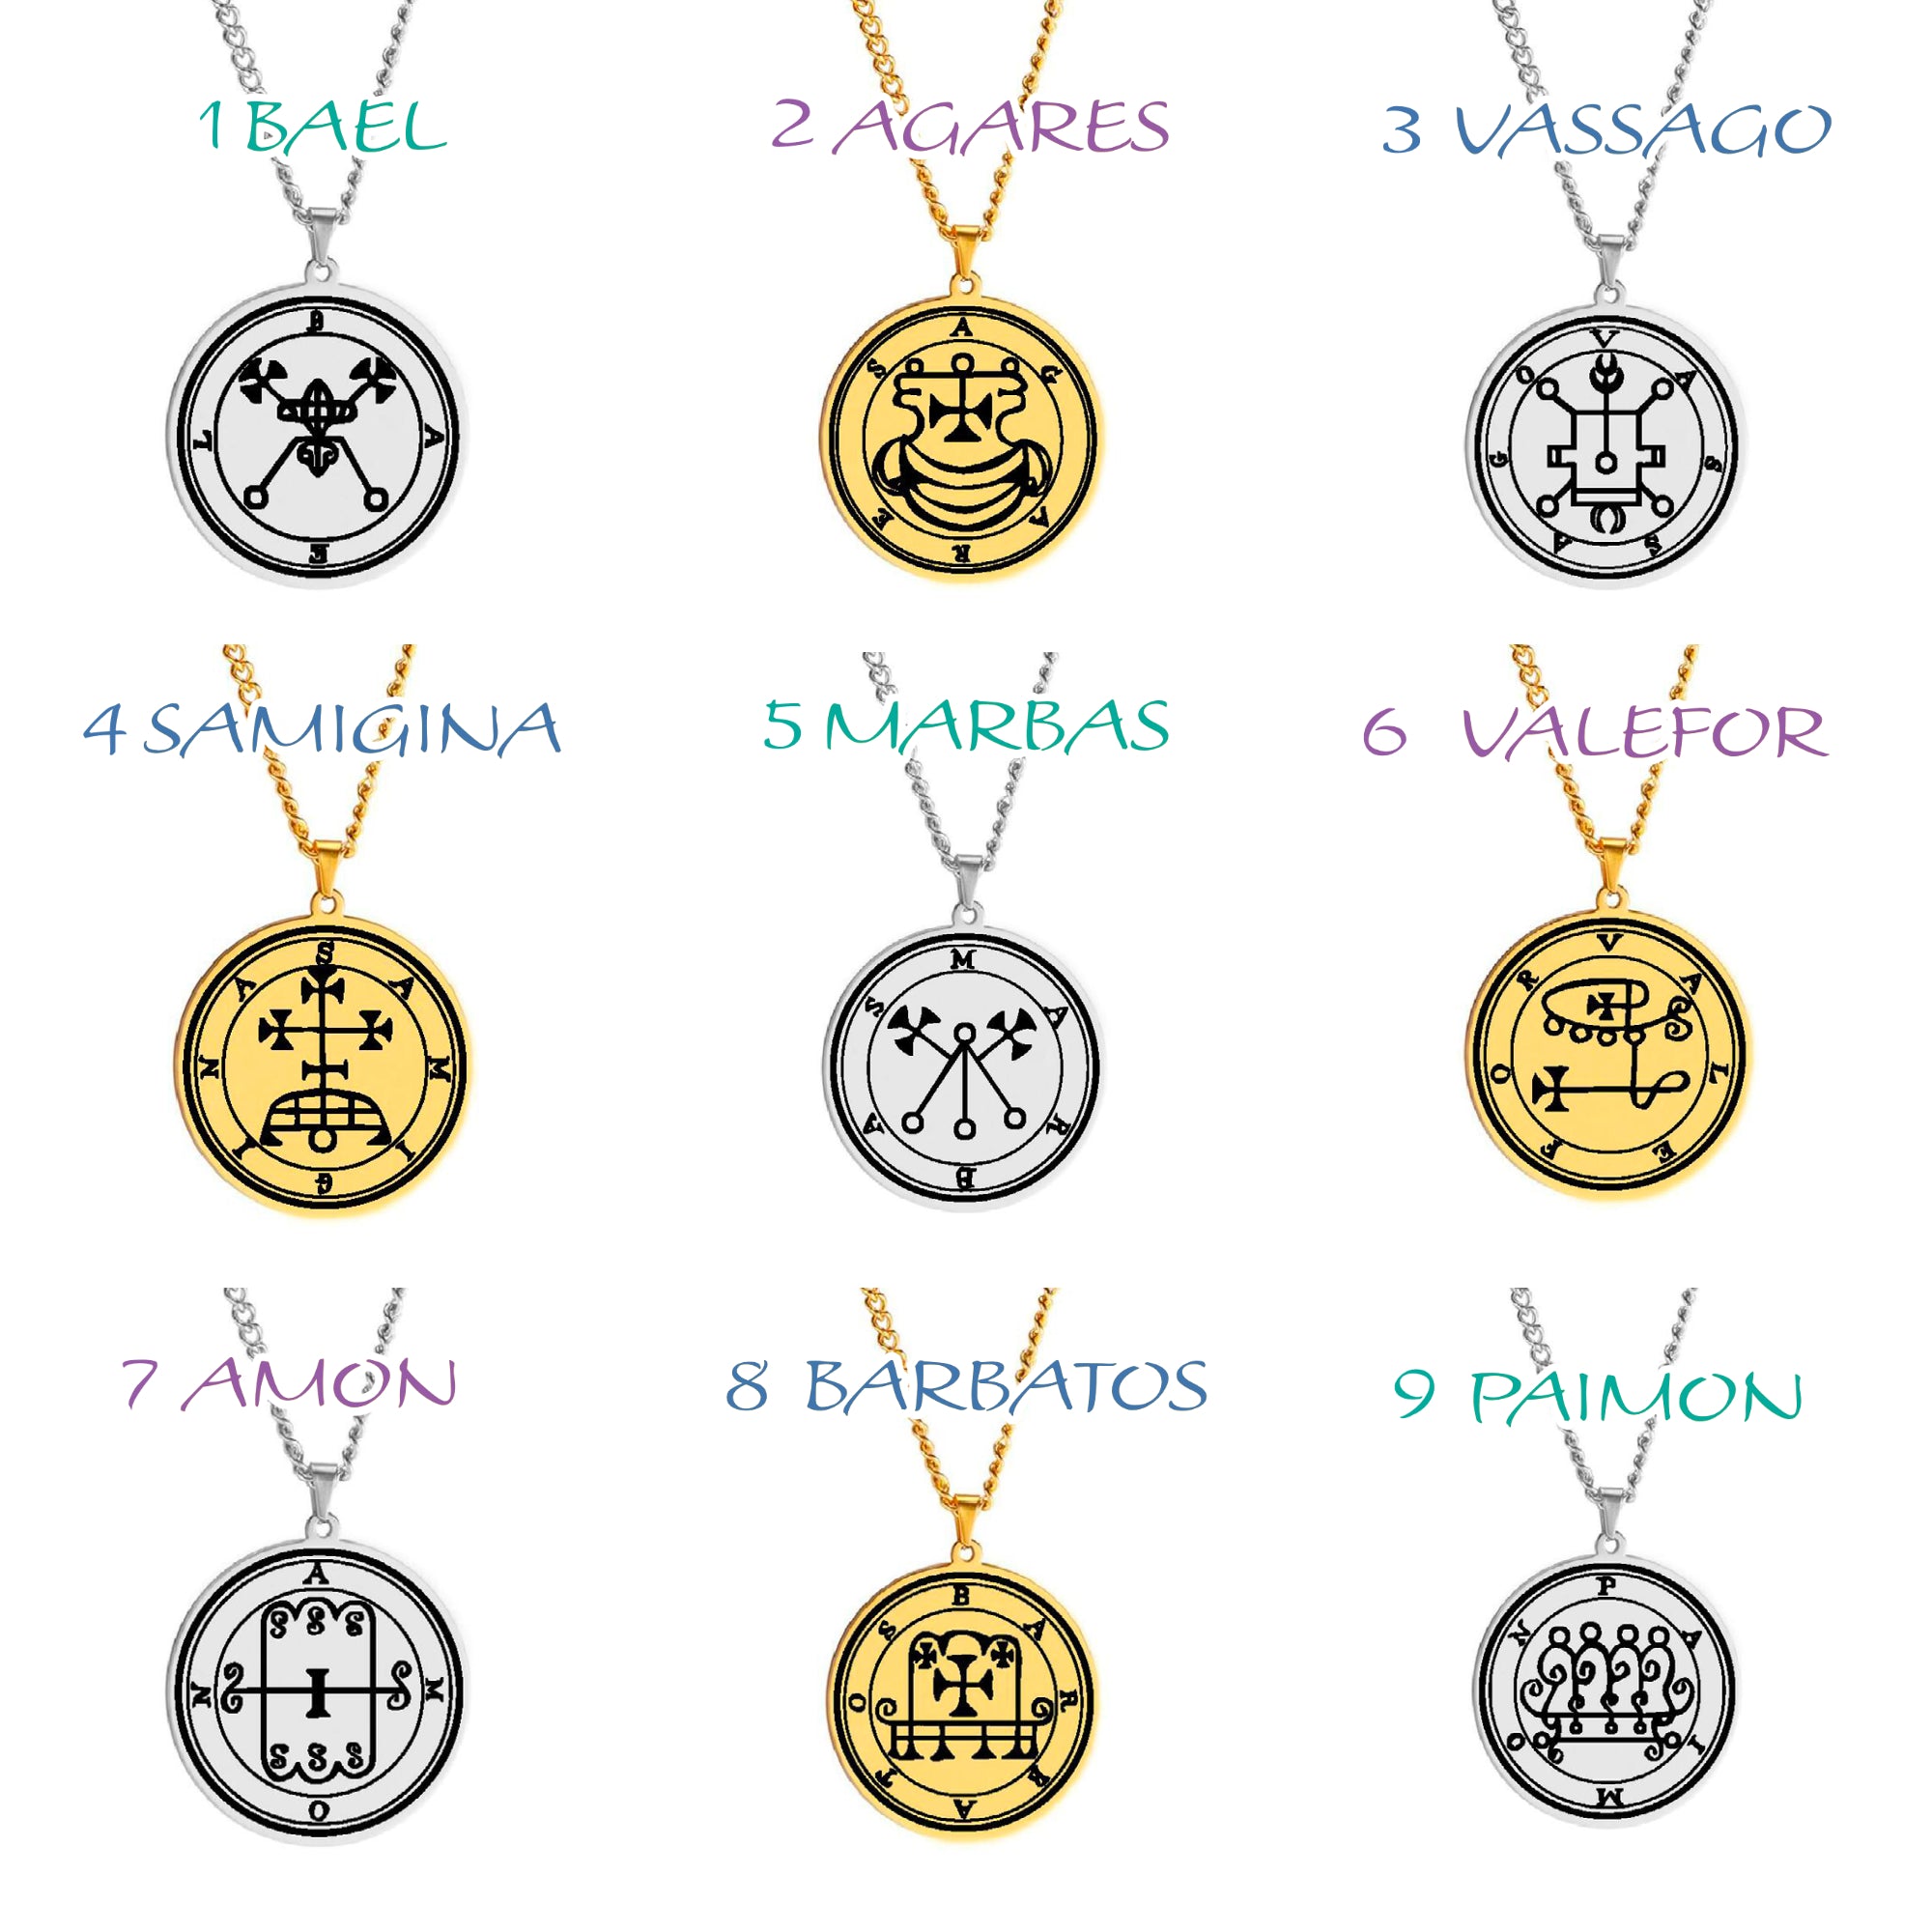 Silver Pendant Necklace With Seals Of The 72 Spirits In The Lesser Key of Solomon (Sigils 61-72) | Apollo Tarot Jewelry Shop